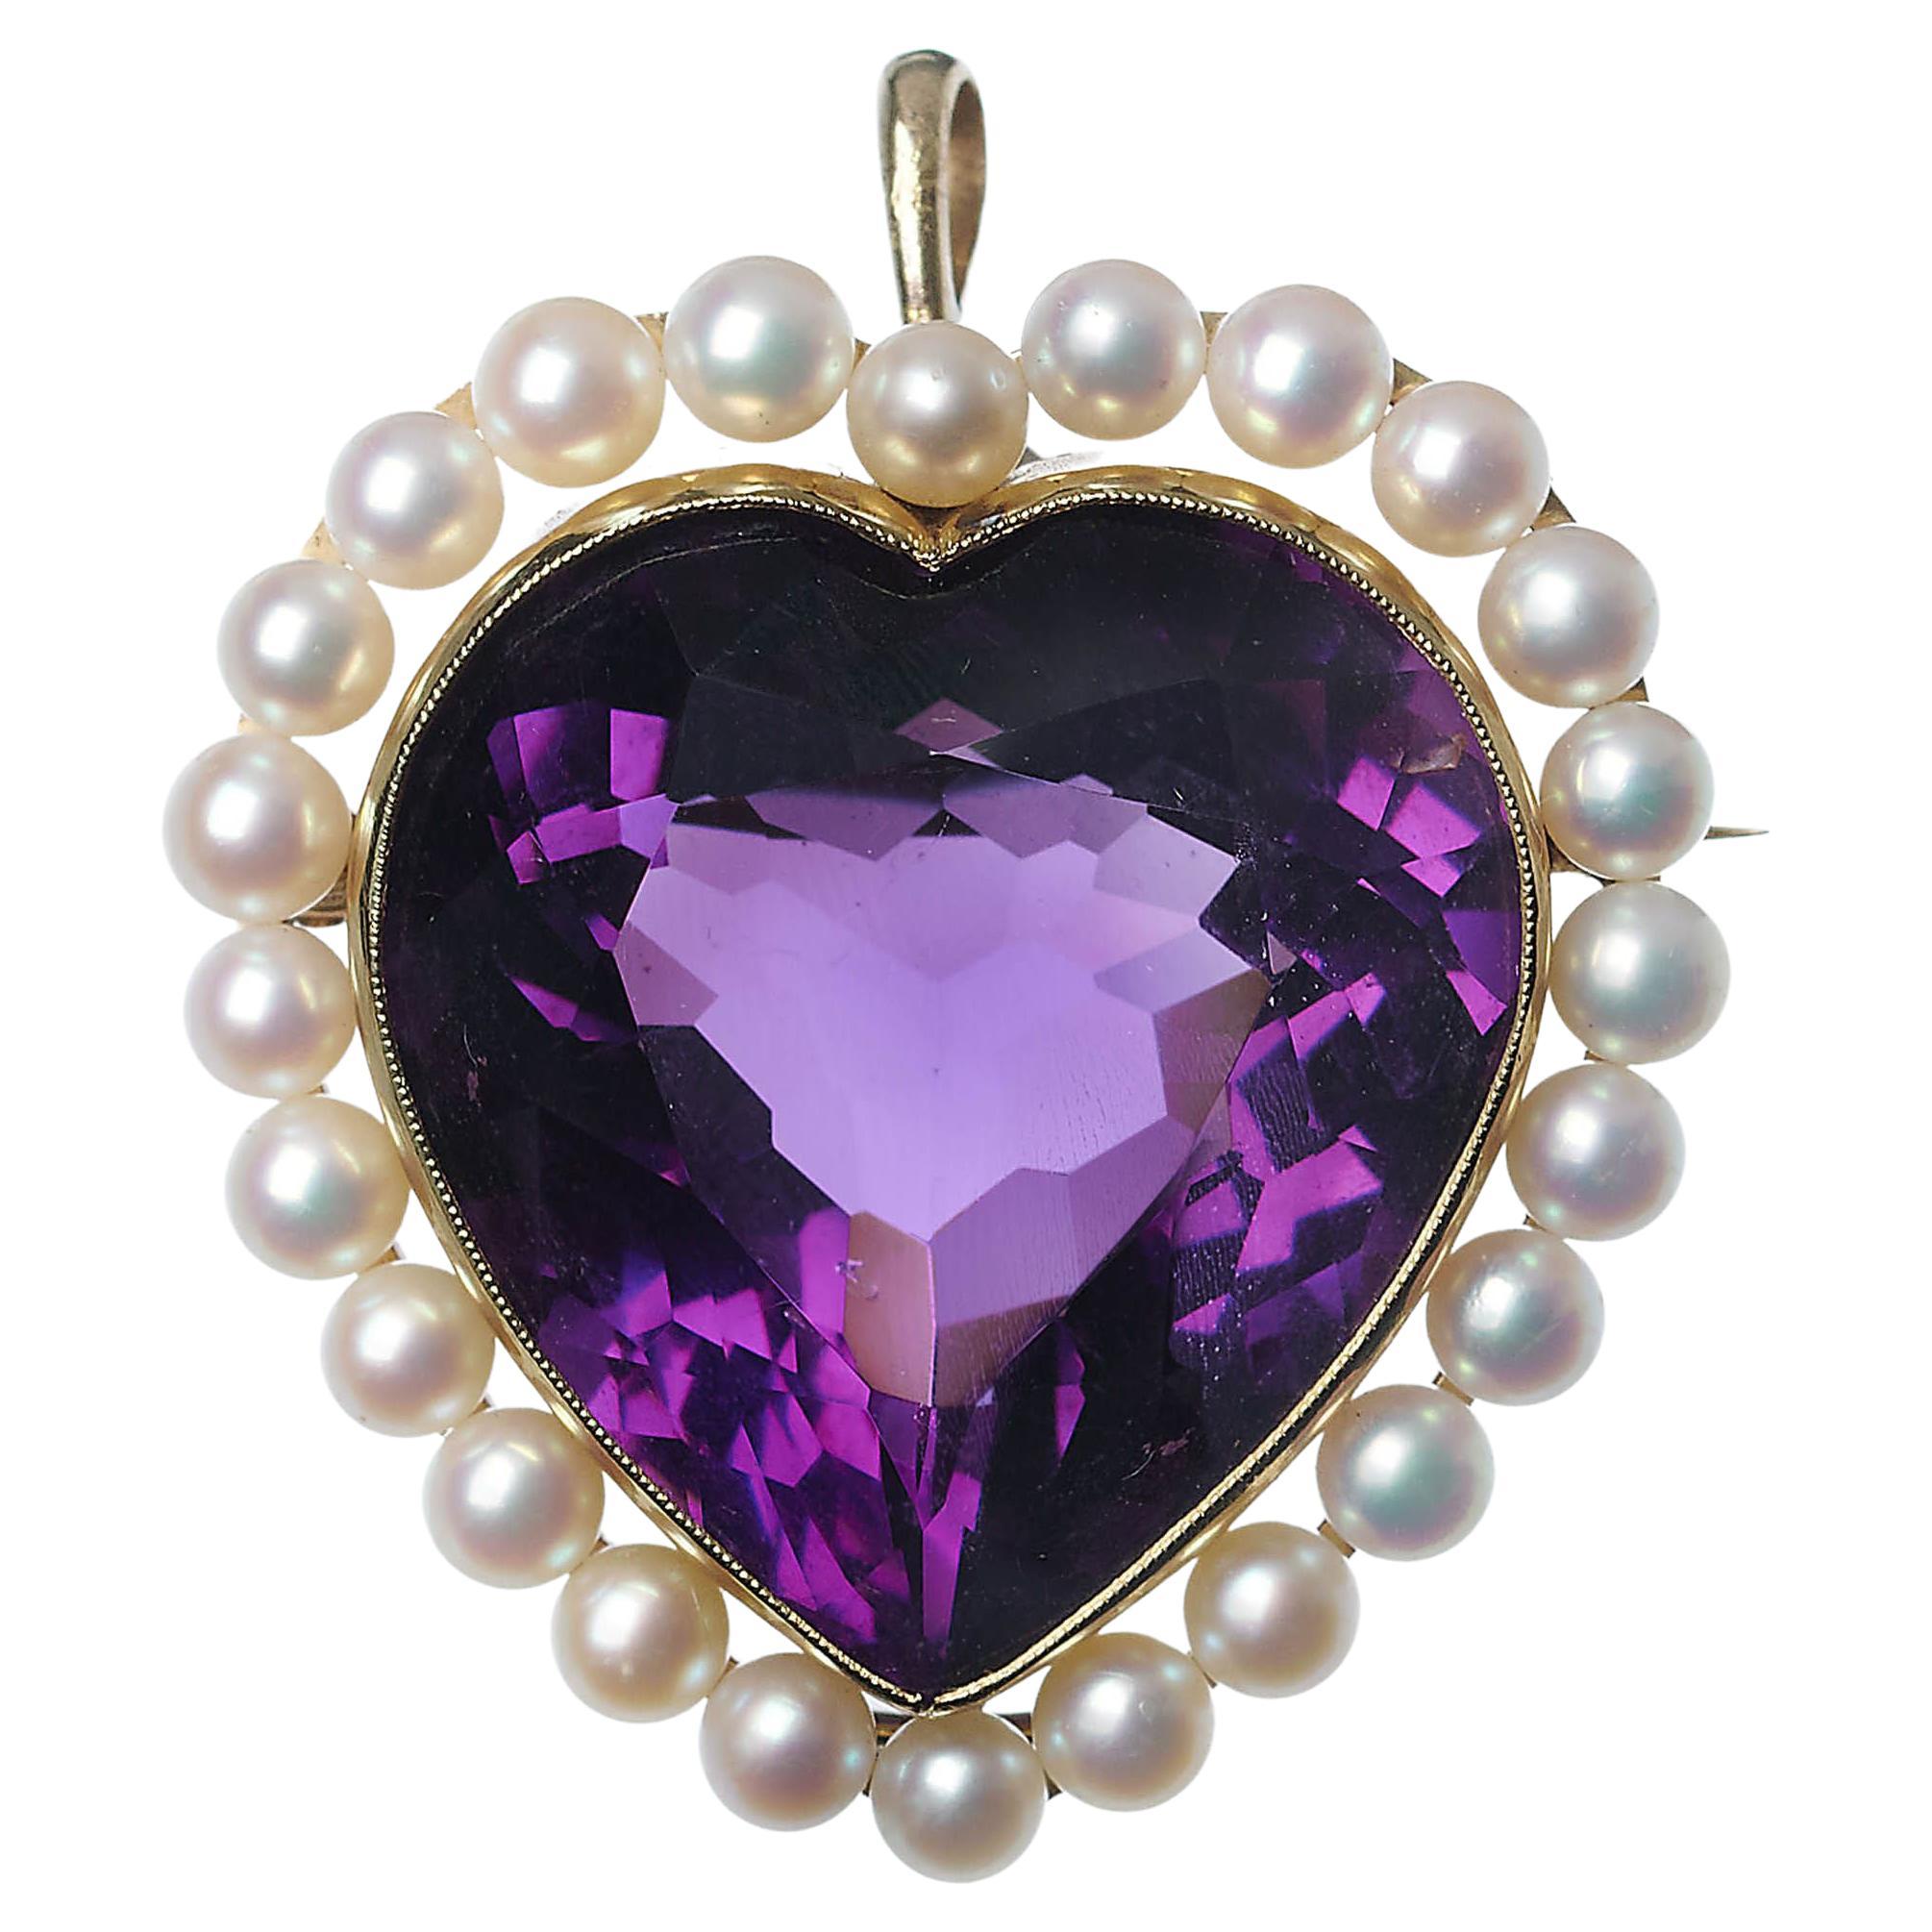 Vintage Amethyst, Cultured Pearl And Gold Heart Brooch Pendant, Circa 1970